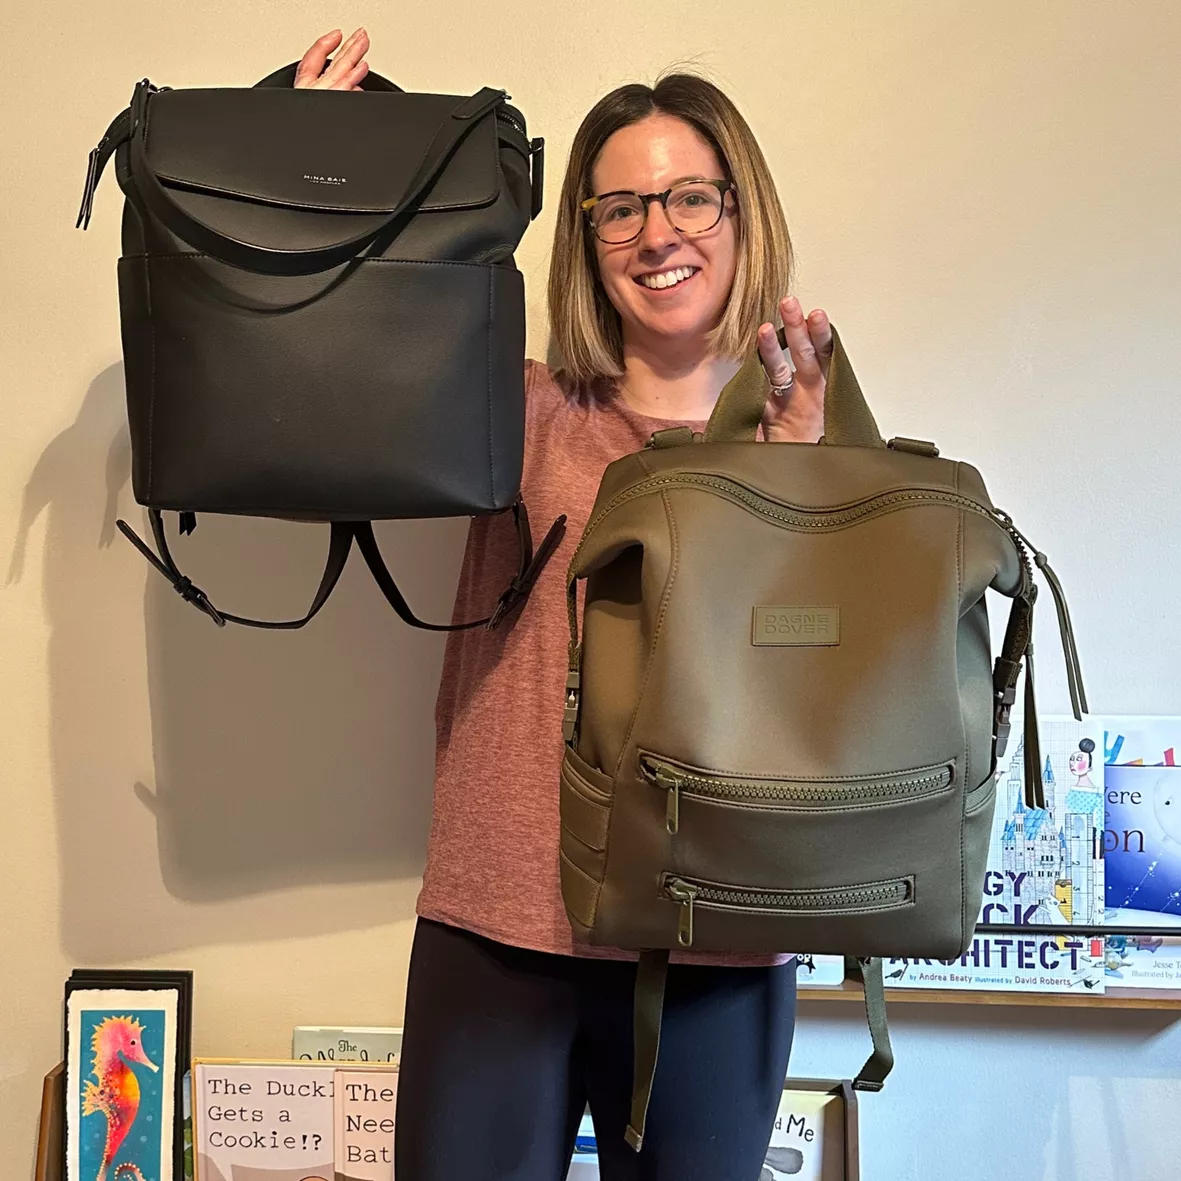 Dagne Dover SMALL Indi Backpack Unboxing, Packing, & Review! 